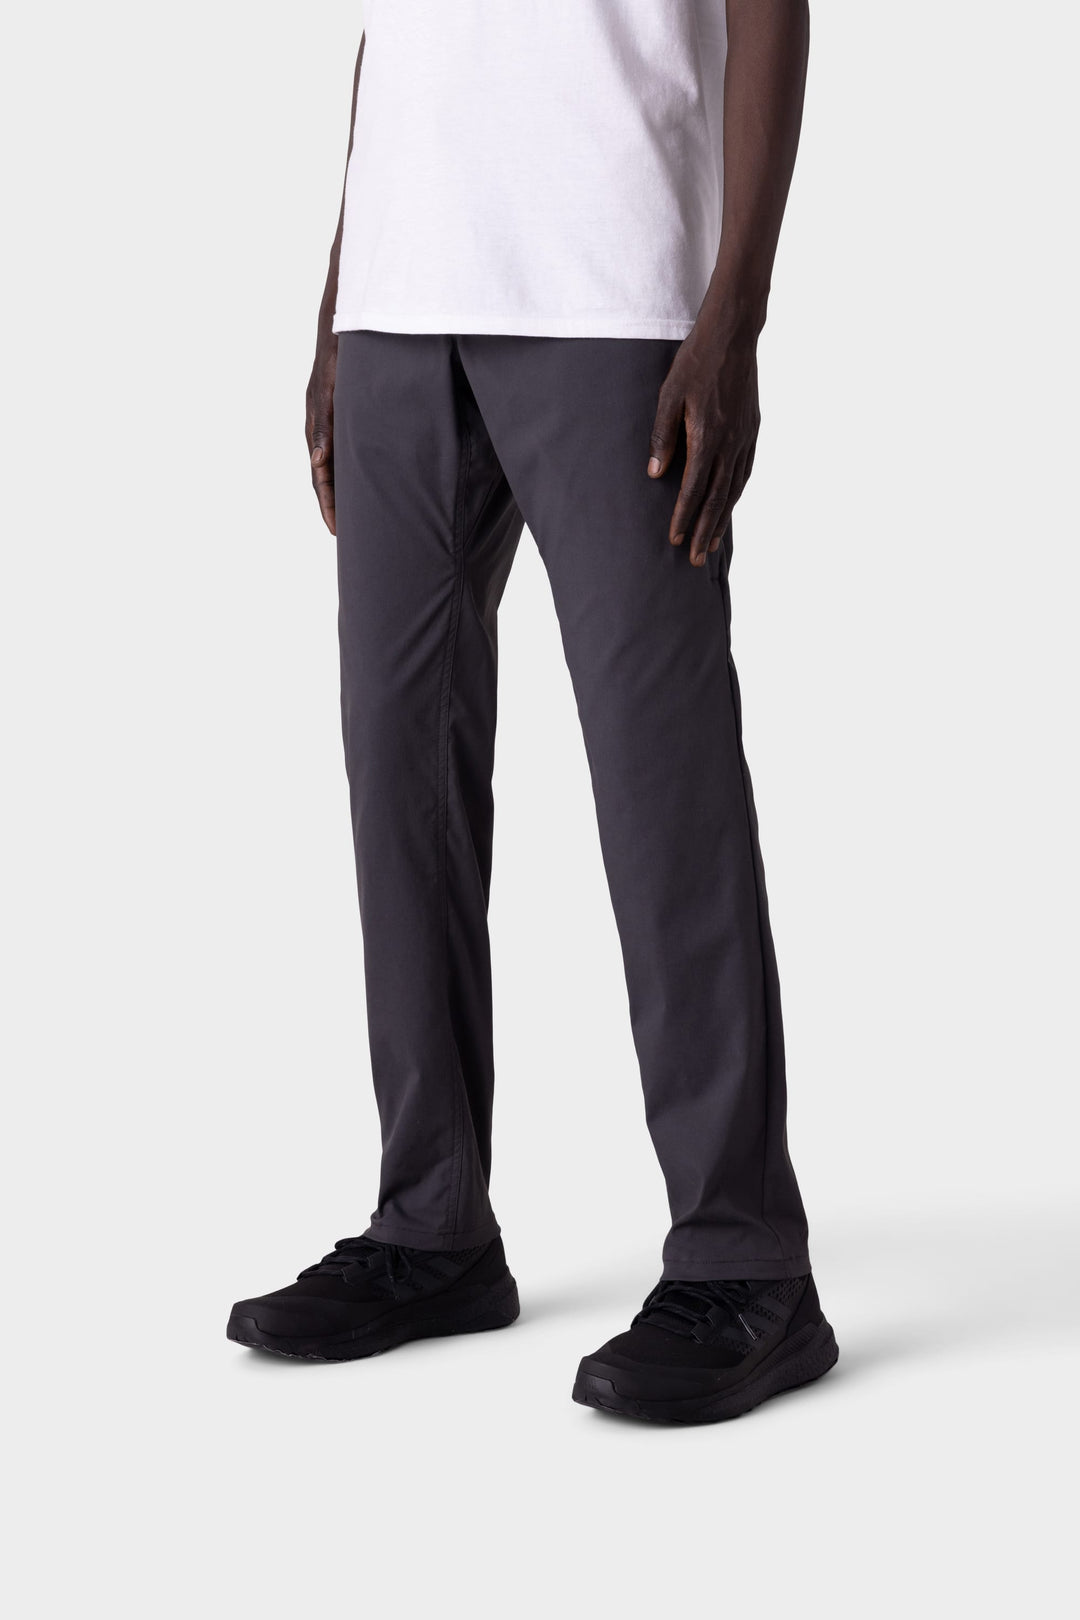 686 Everywhere Pant Slim Fit 34" - Charcoal - Sun Diego Boardshop